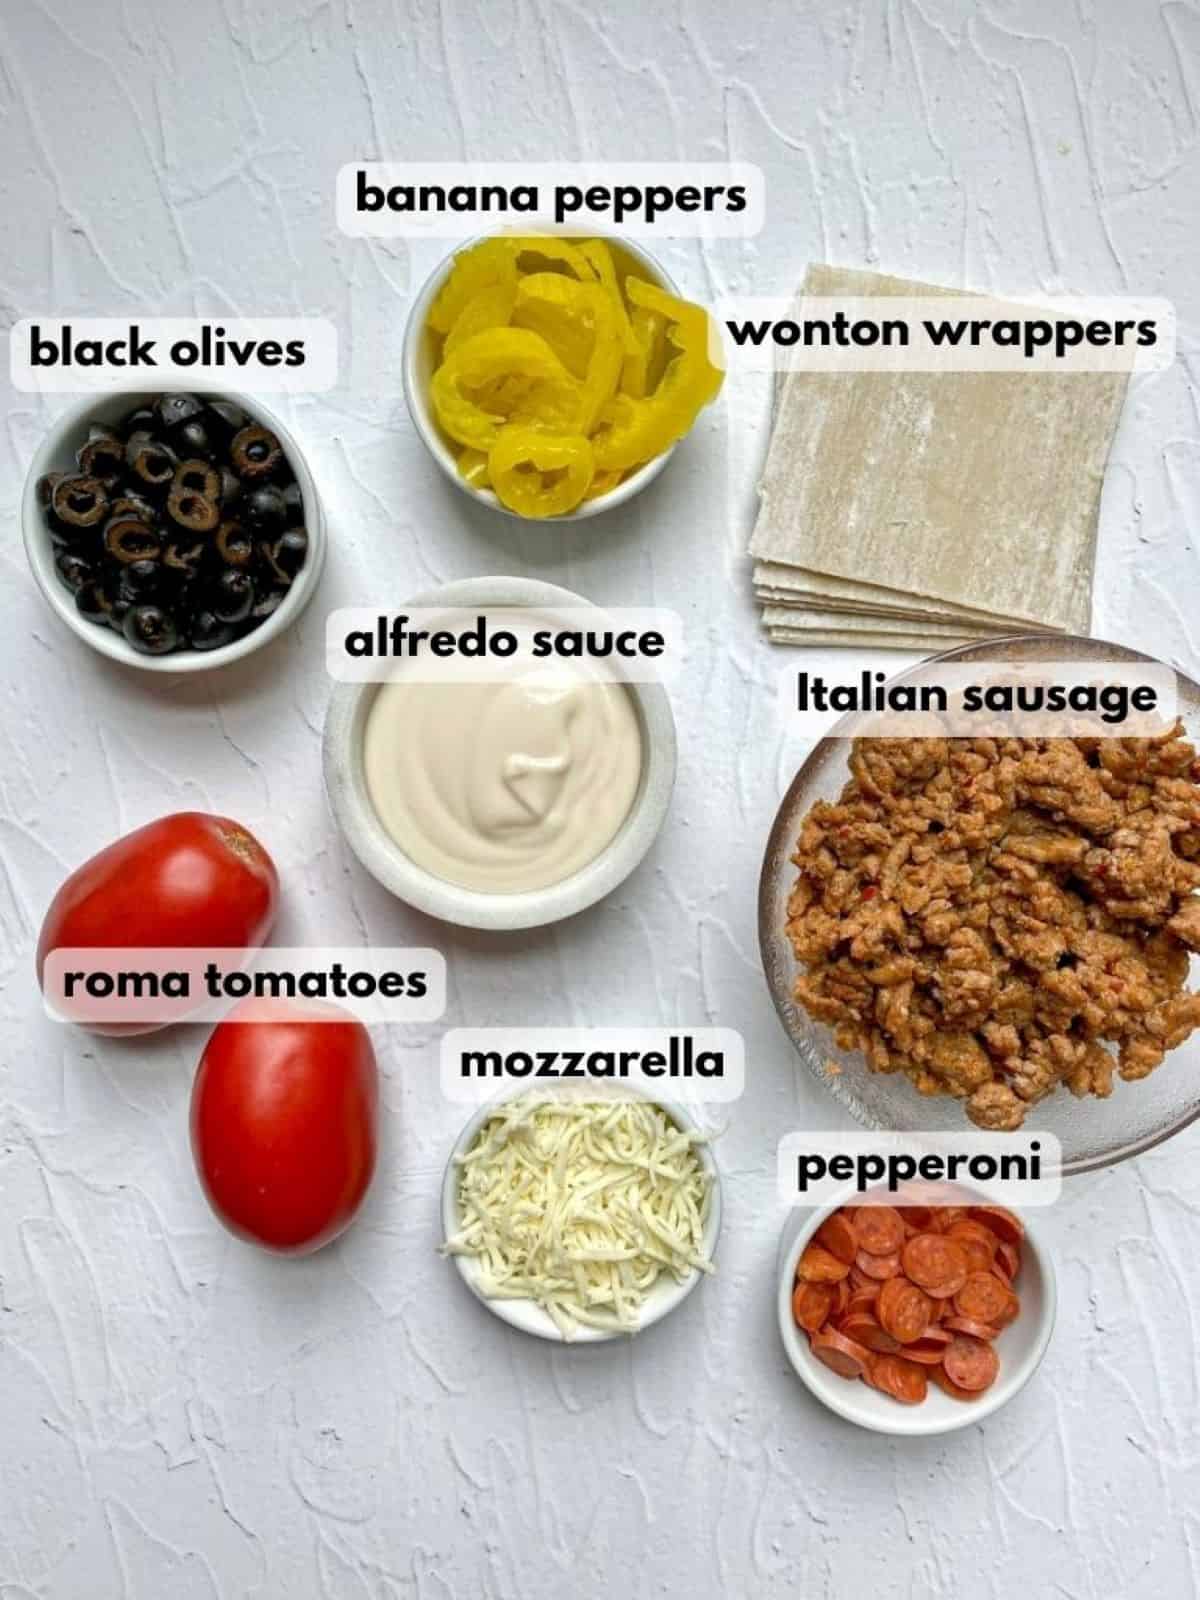 Ingredients needed to make Italian nachos: ground sausage, alfredo sauce, wonton wrappers, black olives, tomatoes, cheese, and pepperoni.